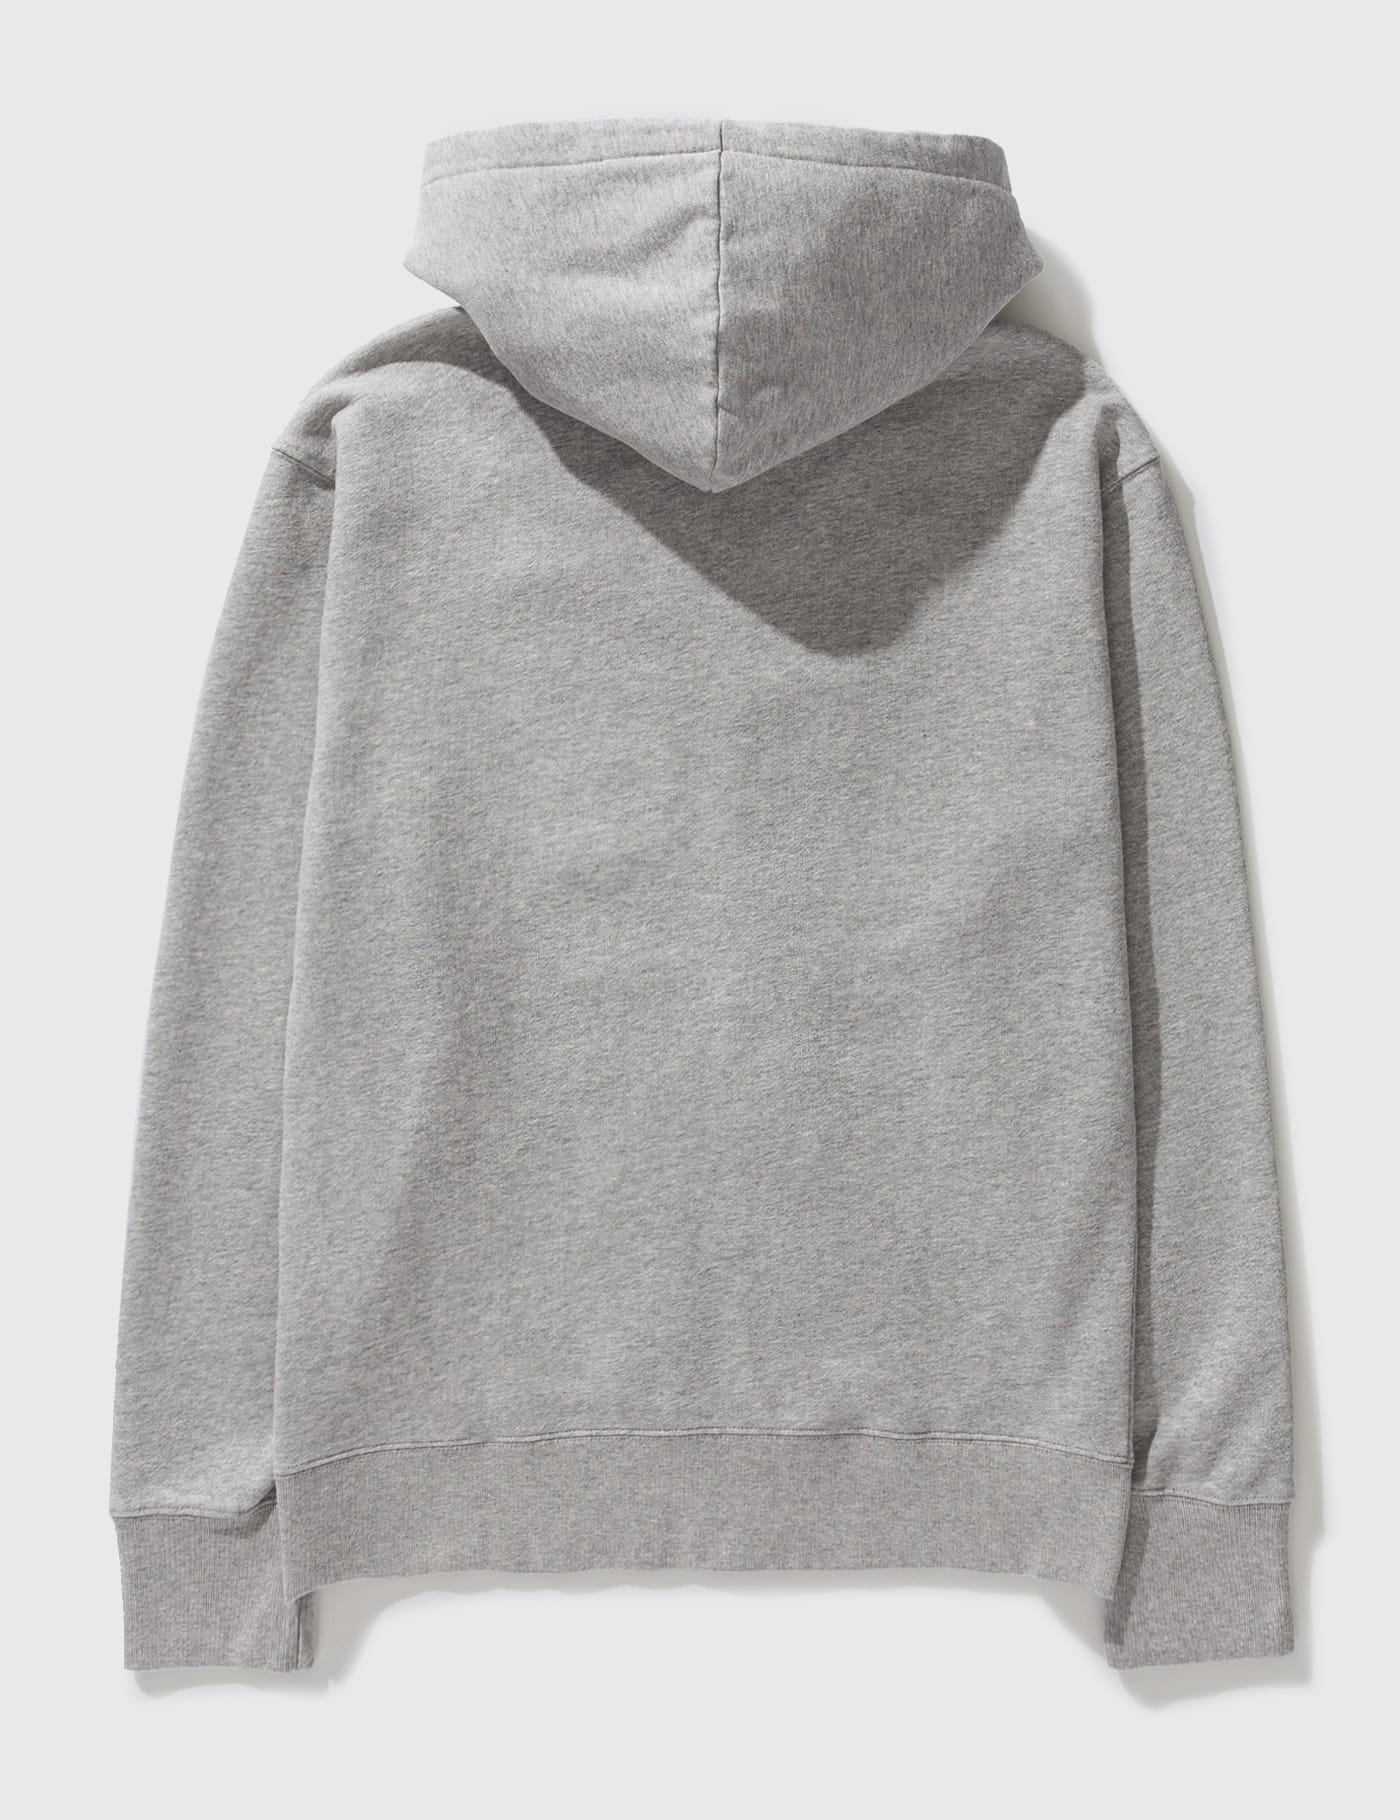 Maison Kitsune - Chillax Fox Patch Zipped Hoodie | HBX - Globally Curated  Fashion and Lifestyle by Hypebeast